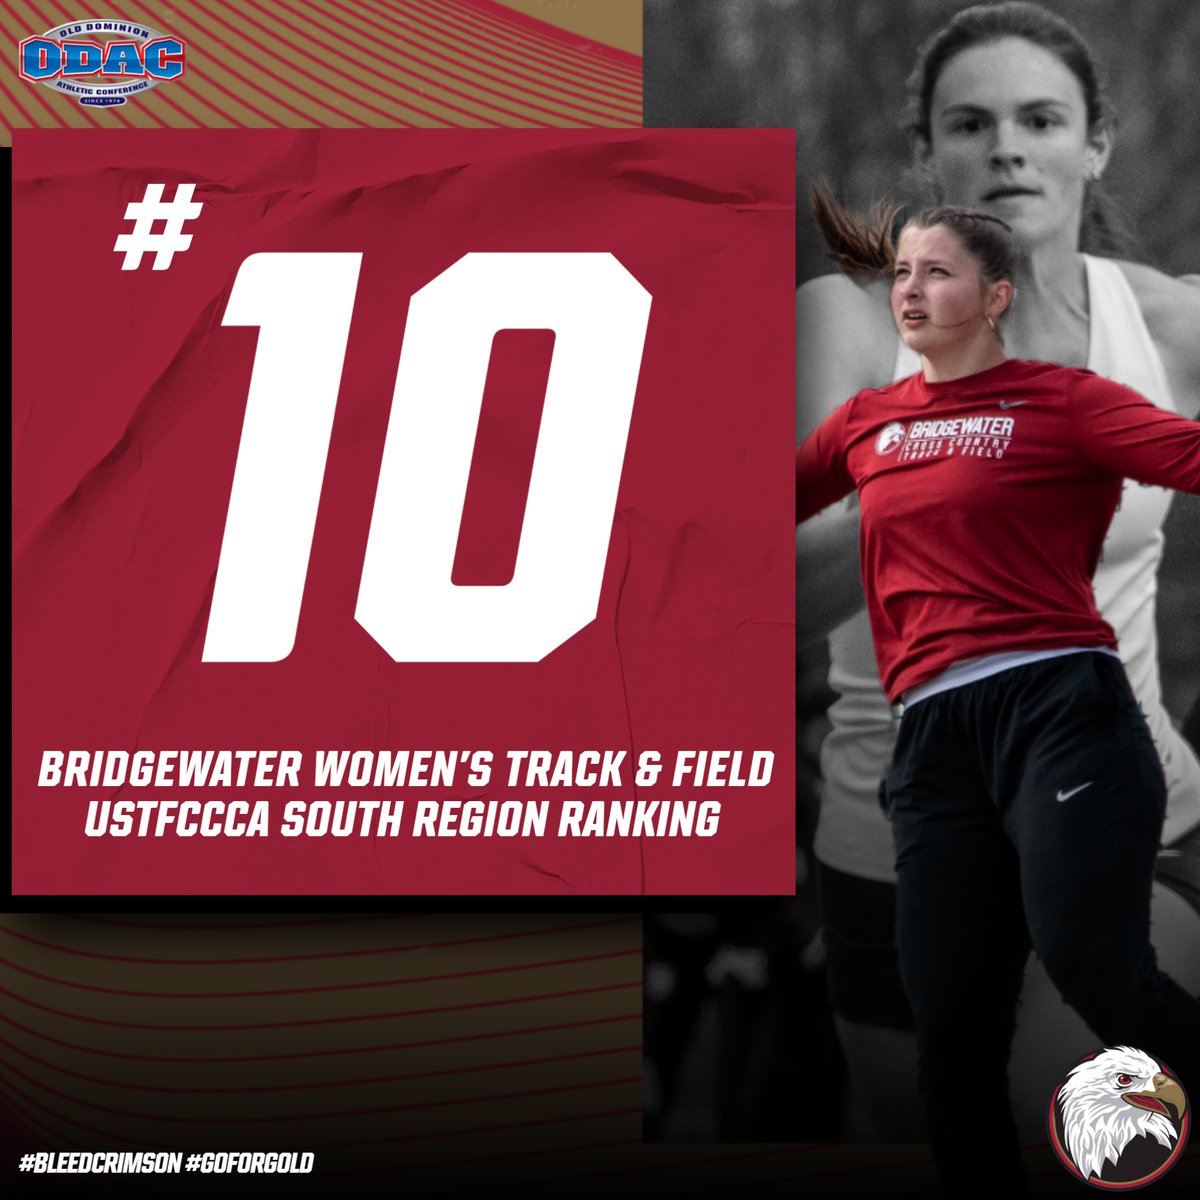 Nothing better than being ranked! Women's @BCXCTF comes in at number 🔟 in this week's USTFCCCA South Region Rankings after a weekend at the VertKlasse Meeting #BleedCrimson #GoForGold 🔗 tinyurl.com/27chlxxf